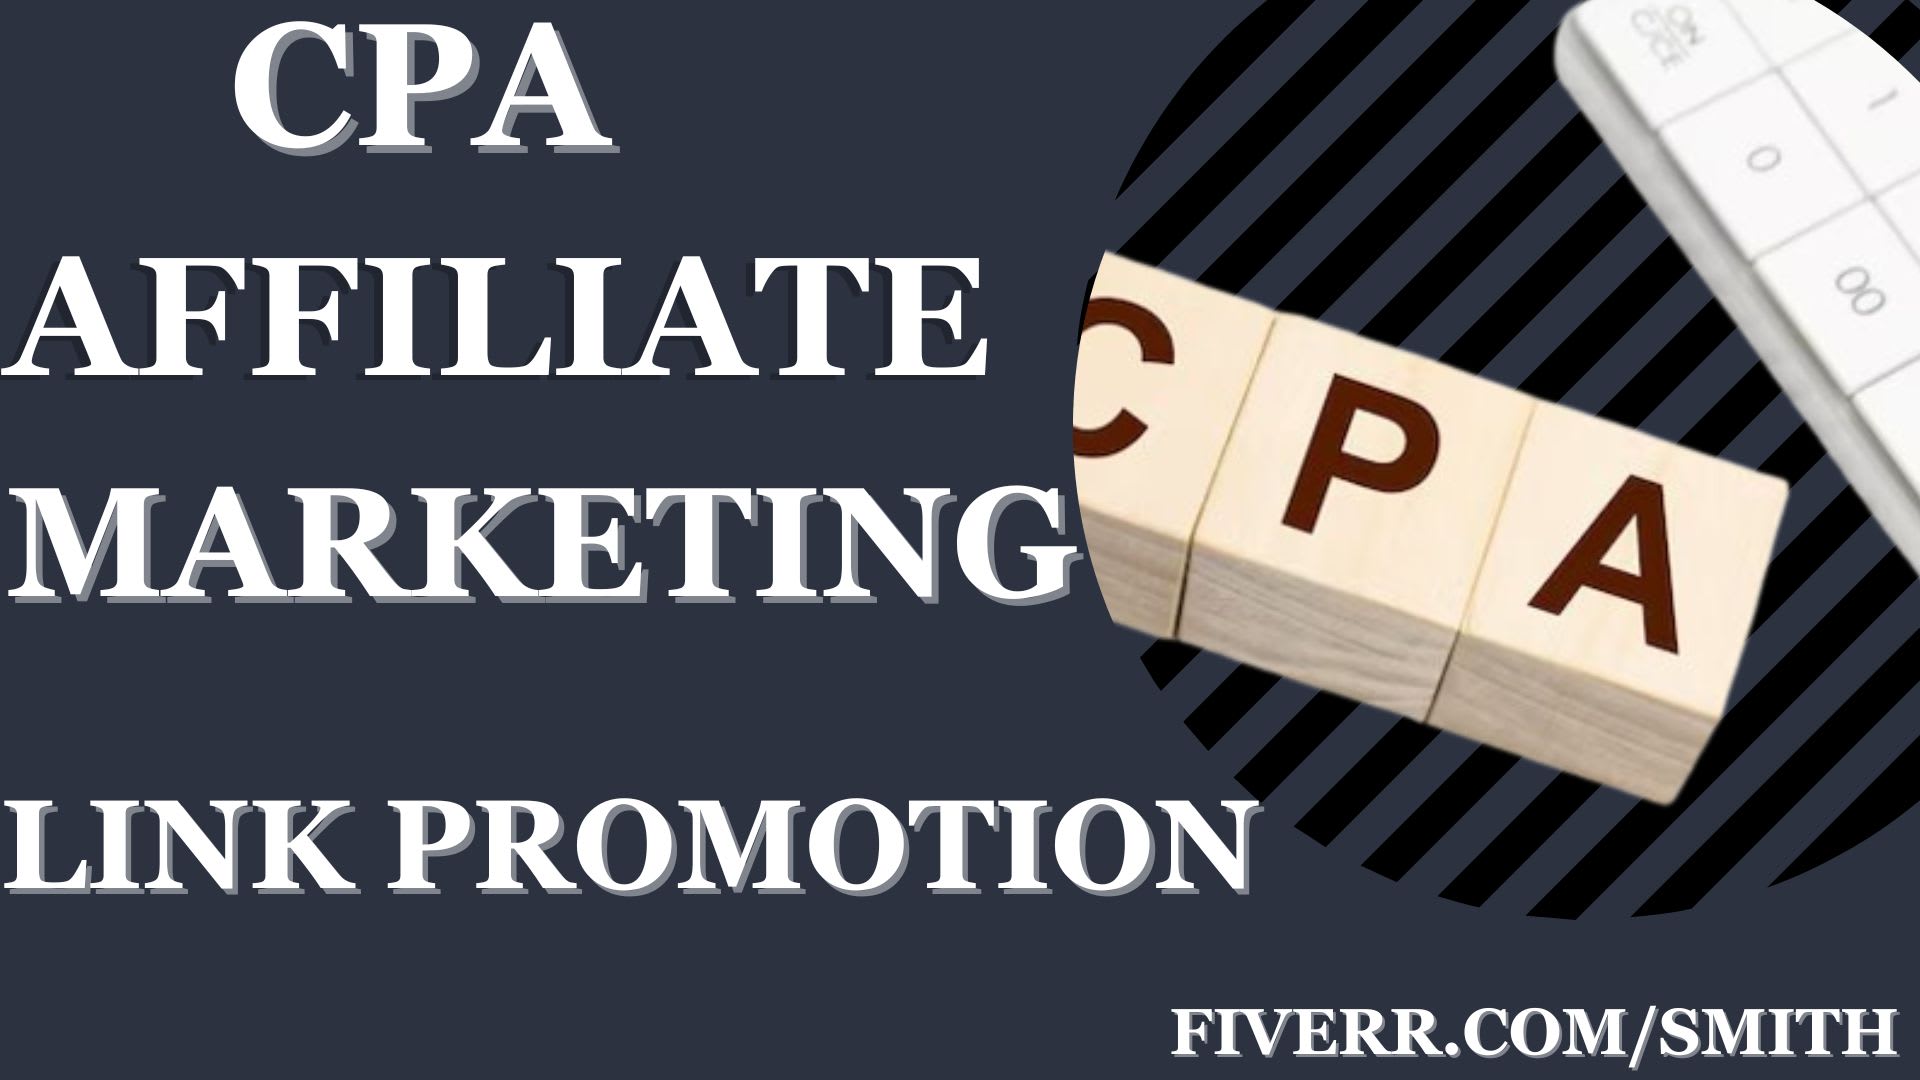 do converting click bank link promotion, CPA affiliate marketing , CPA offers